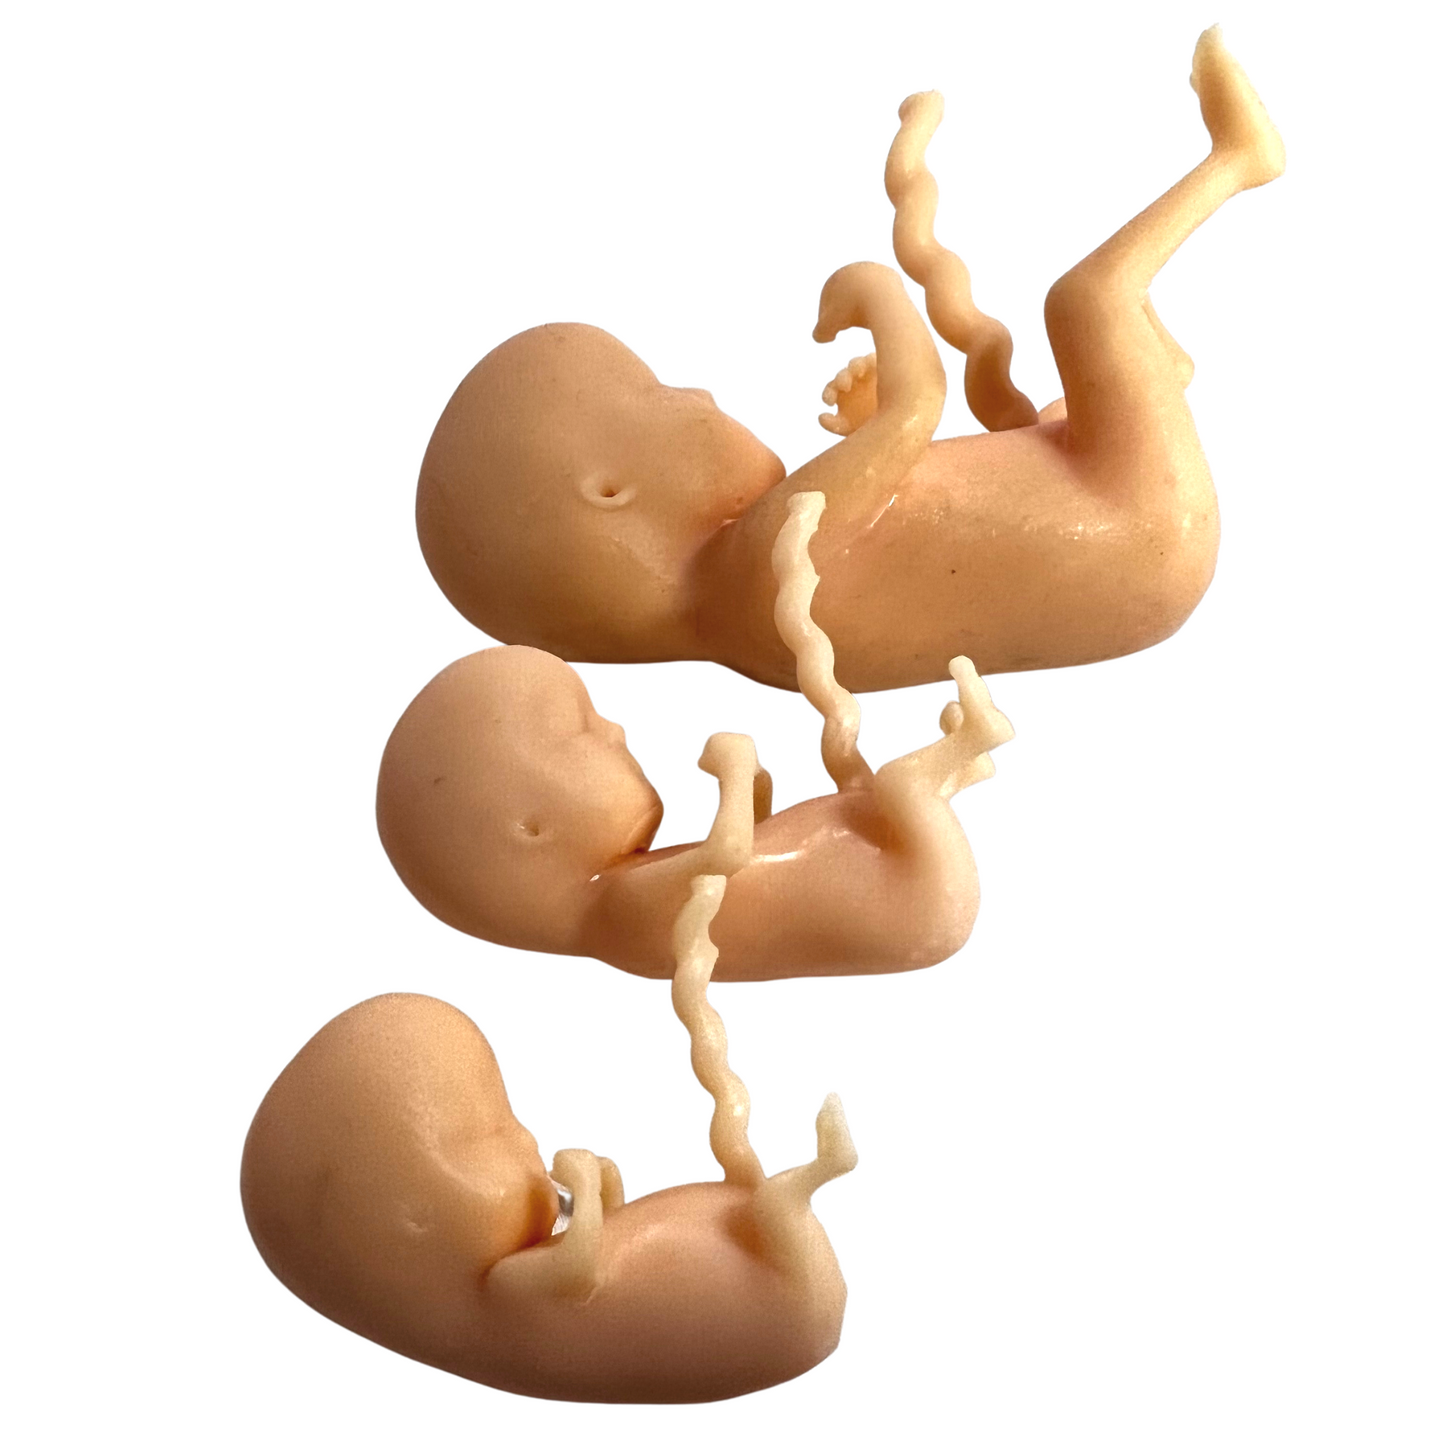 10, 12 and 14 week fetus models demonstrate the changes that occur during fetal development.